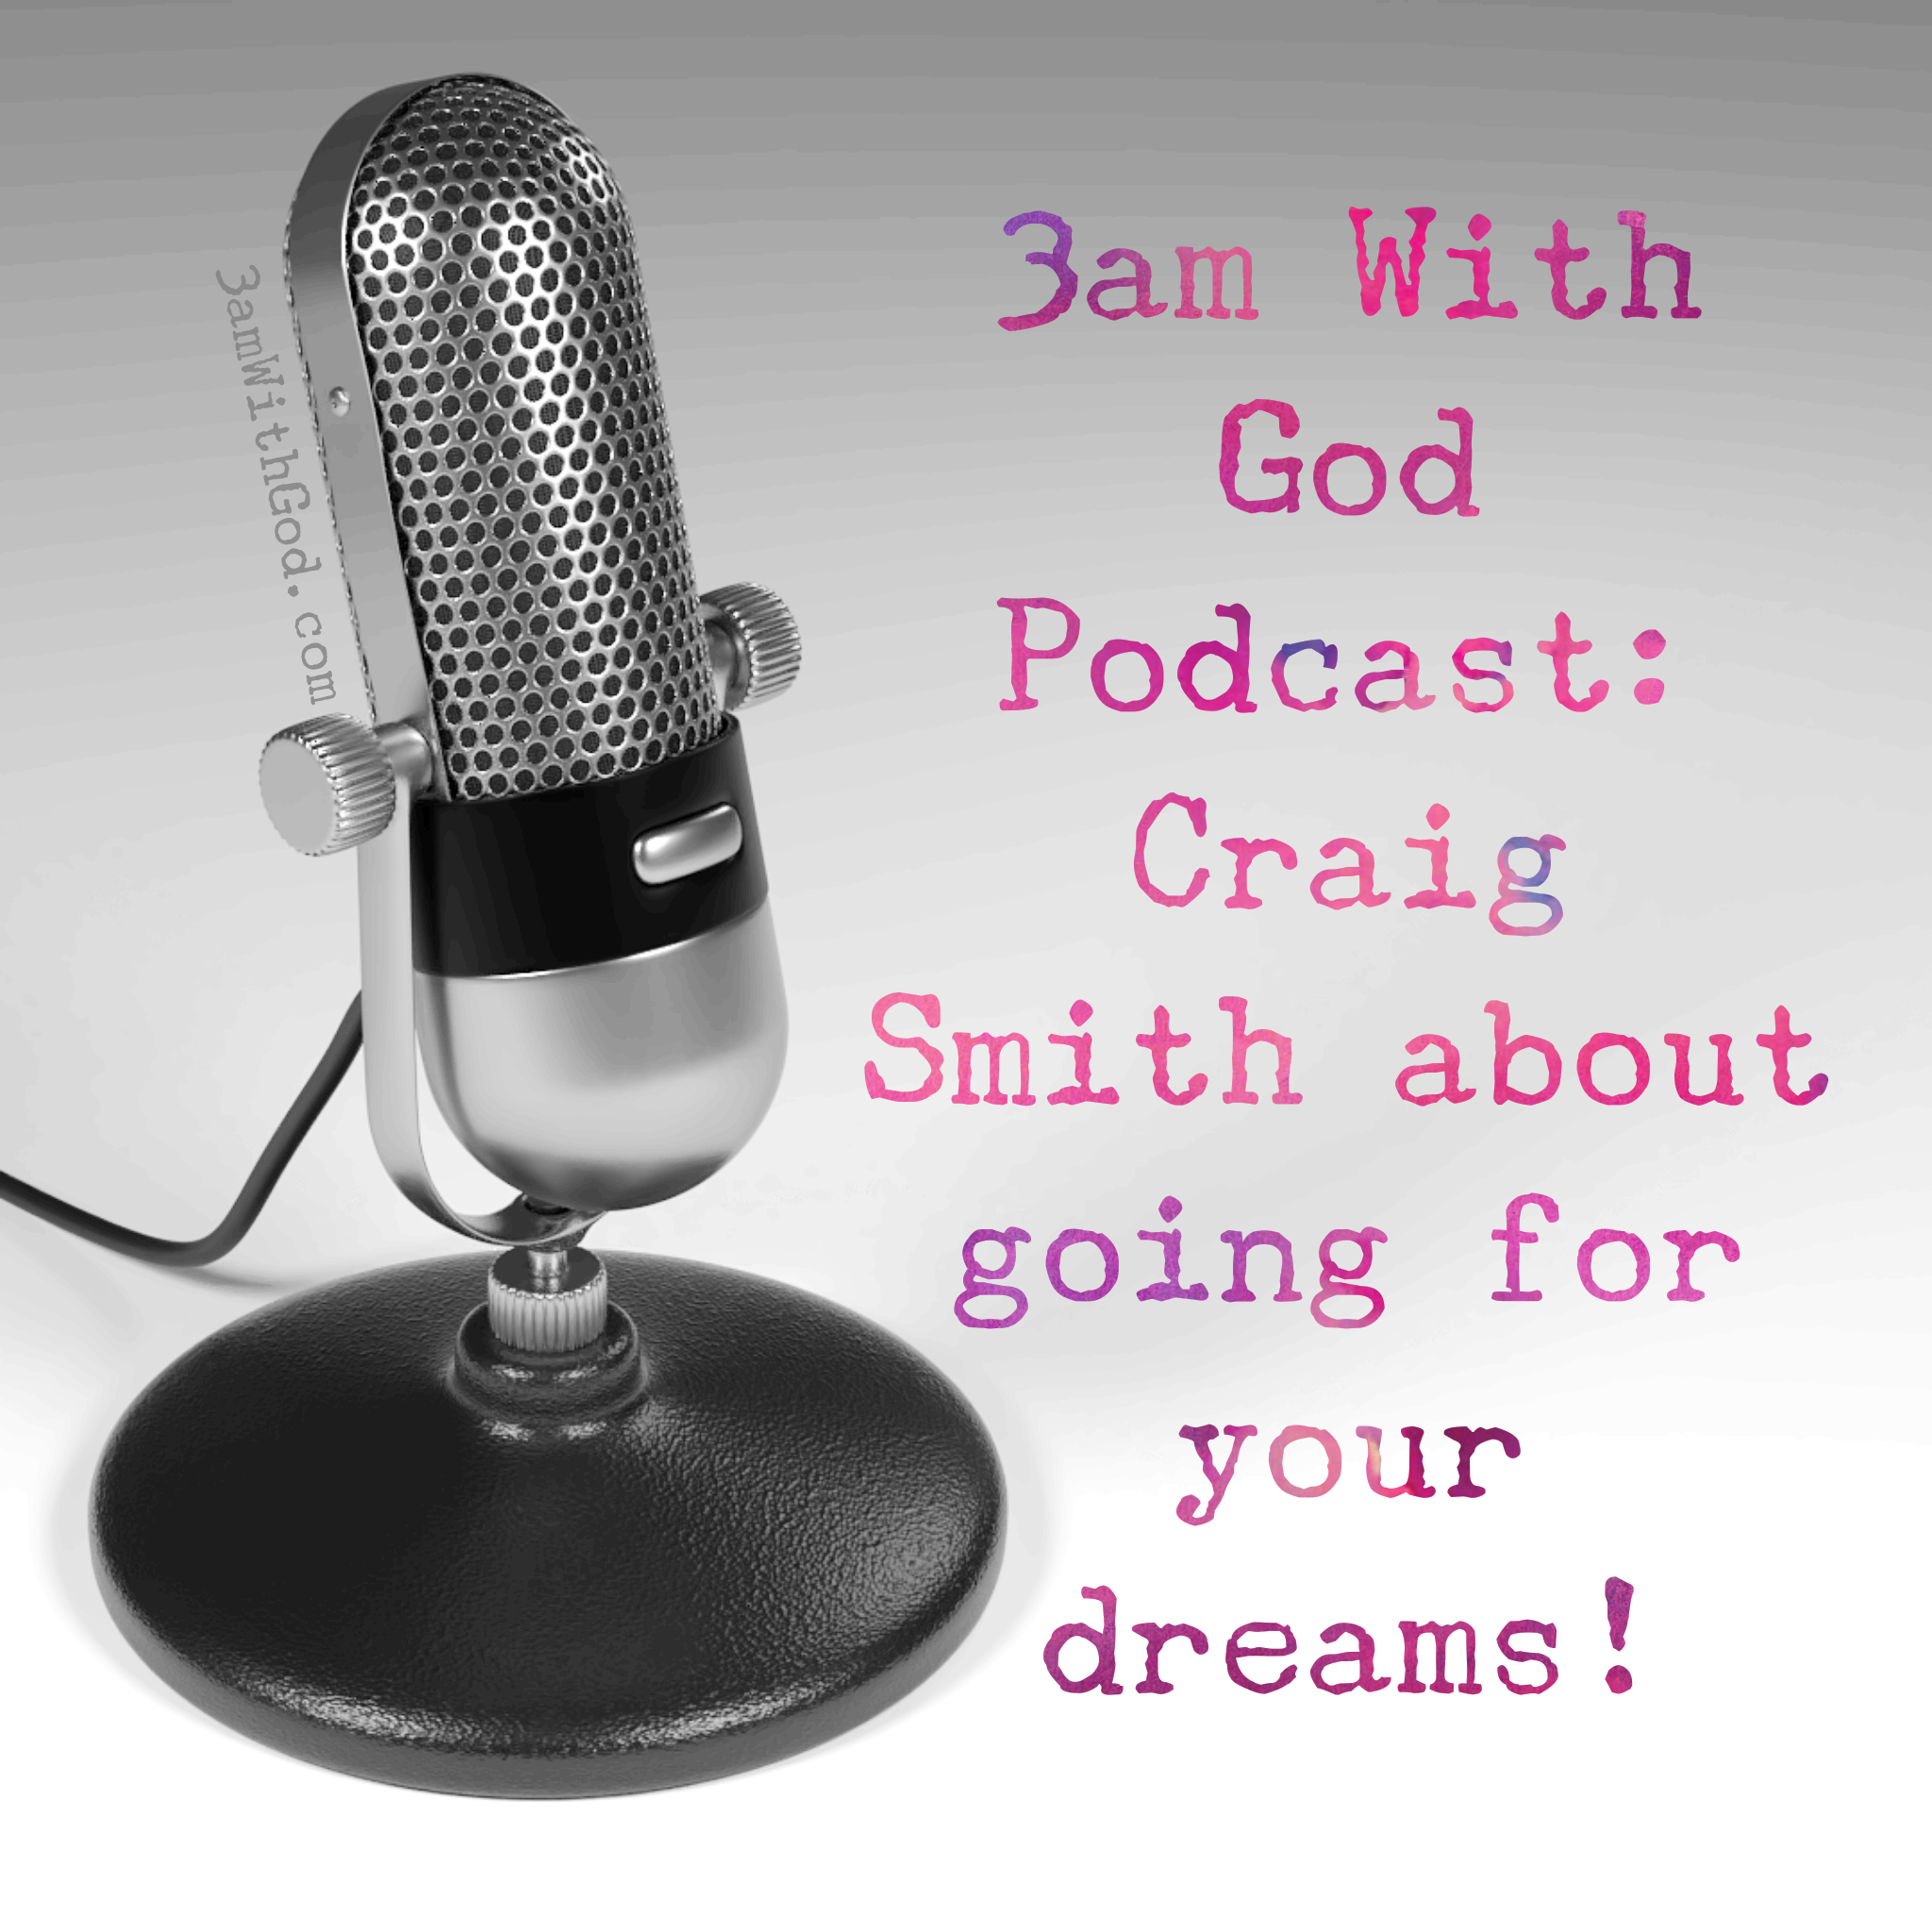 Craig Smith guest on the 3am With God Podcast